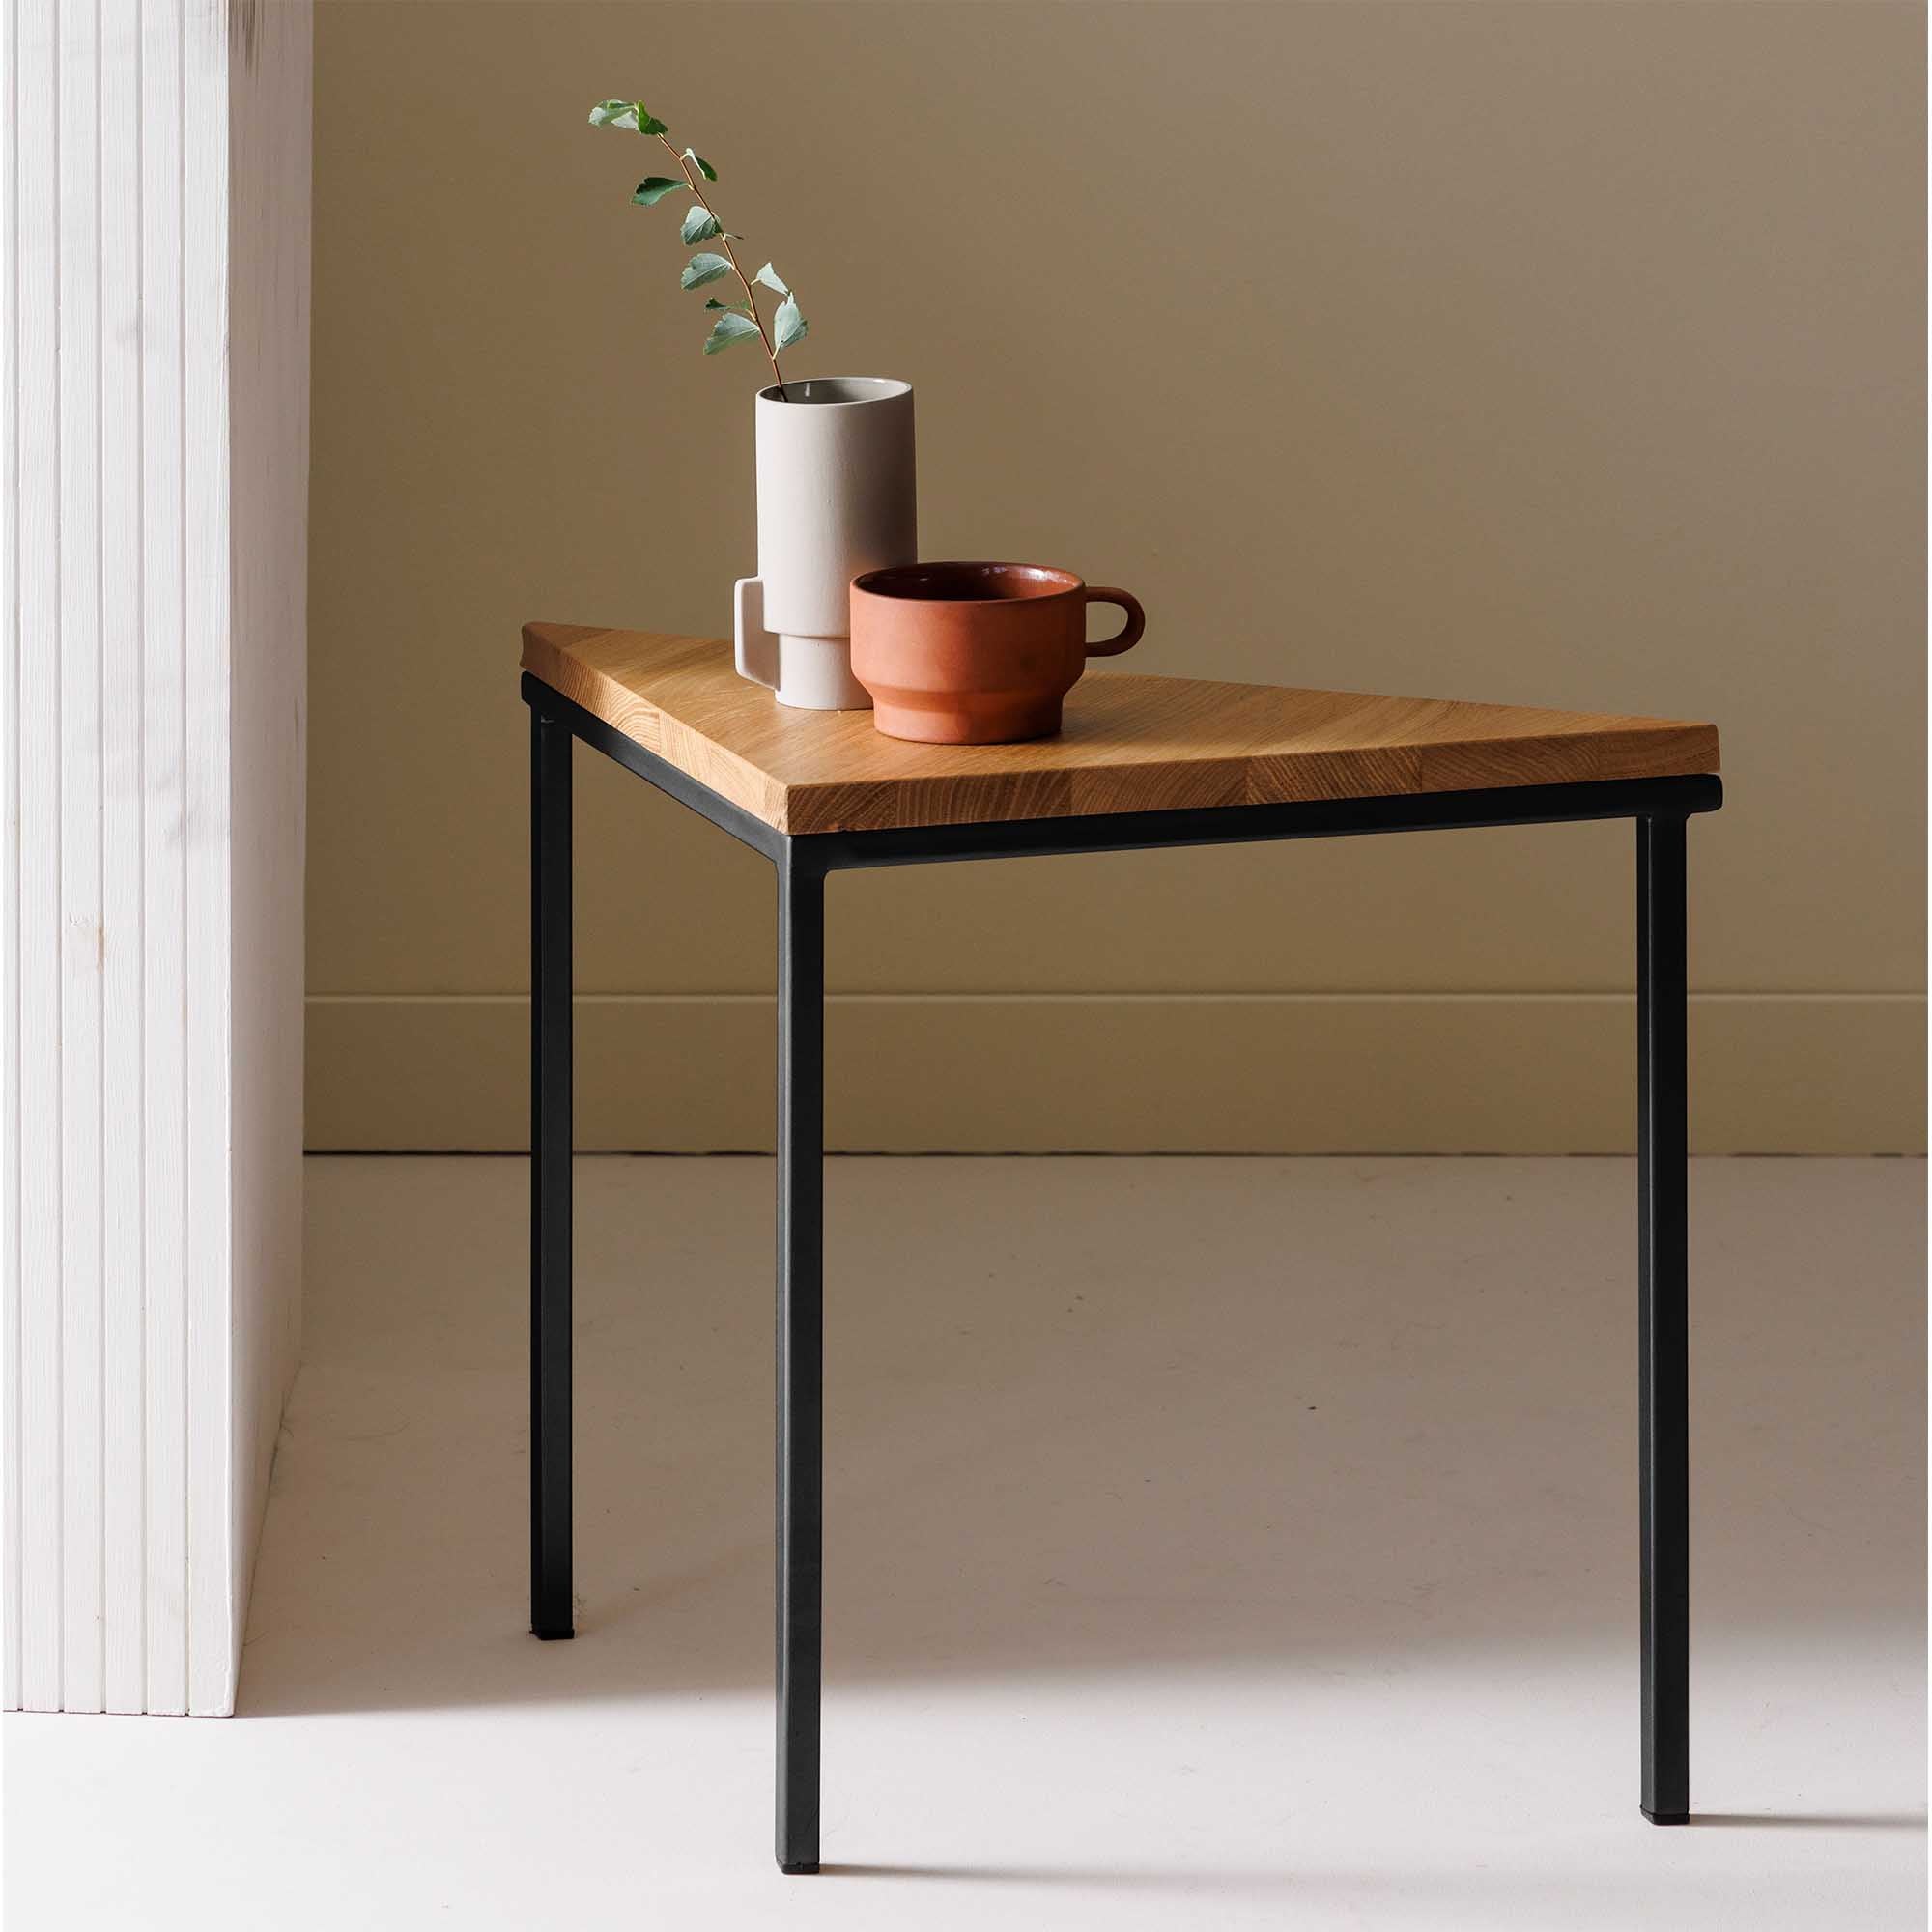 Tripod Table, Oak Wood, Natural Colour black frame, interior view with vase and mug